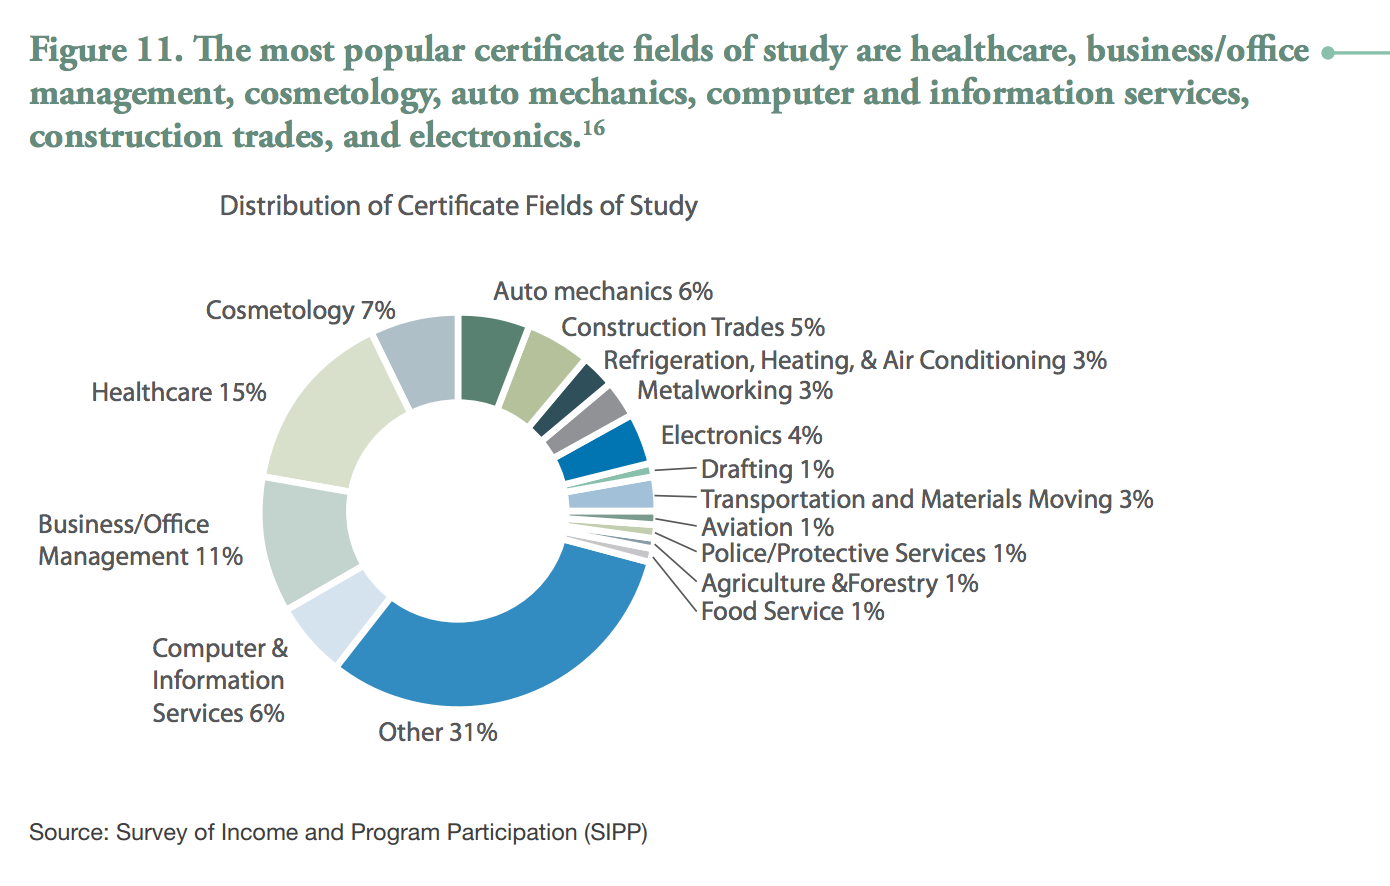 Distribution of Certificate Fields of Study